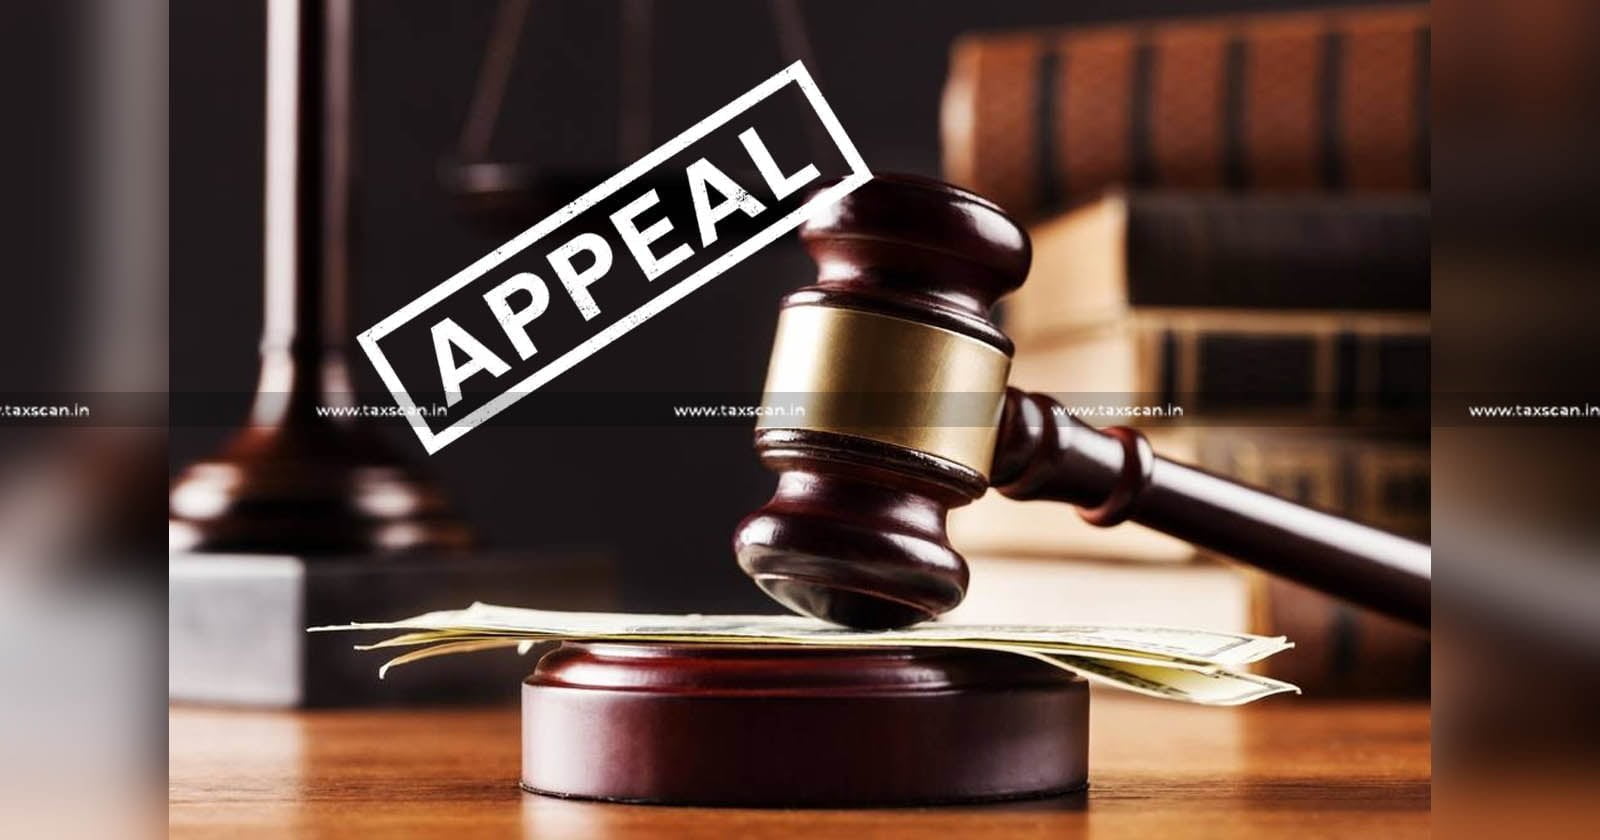 Transfer Appeals - Appeal - Power to Transfer Appeals - Respective Benches - ITAT - ITAT Dismisses Appeal - Taxscan